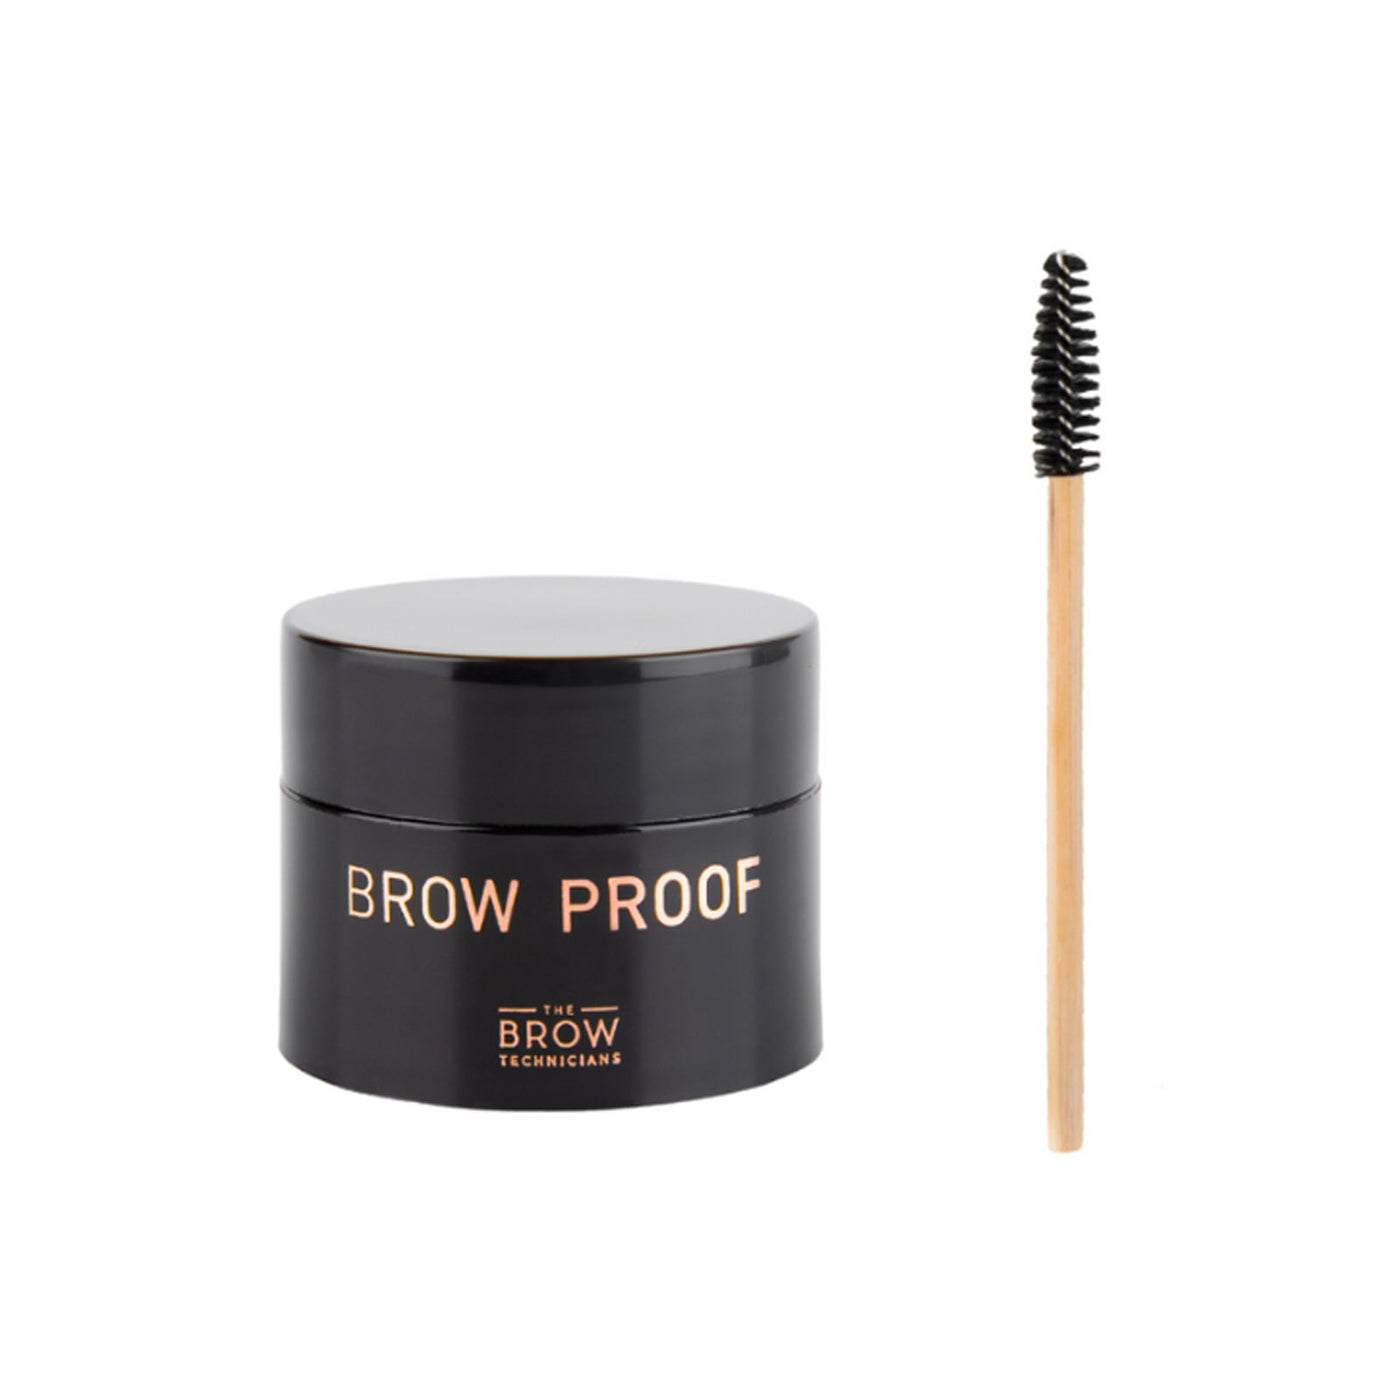 The Brow Technicians Brow Proof Super Hold Clear Brow Glue with spoolie